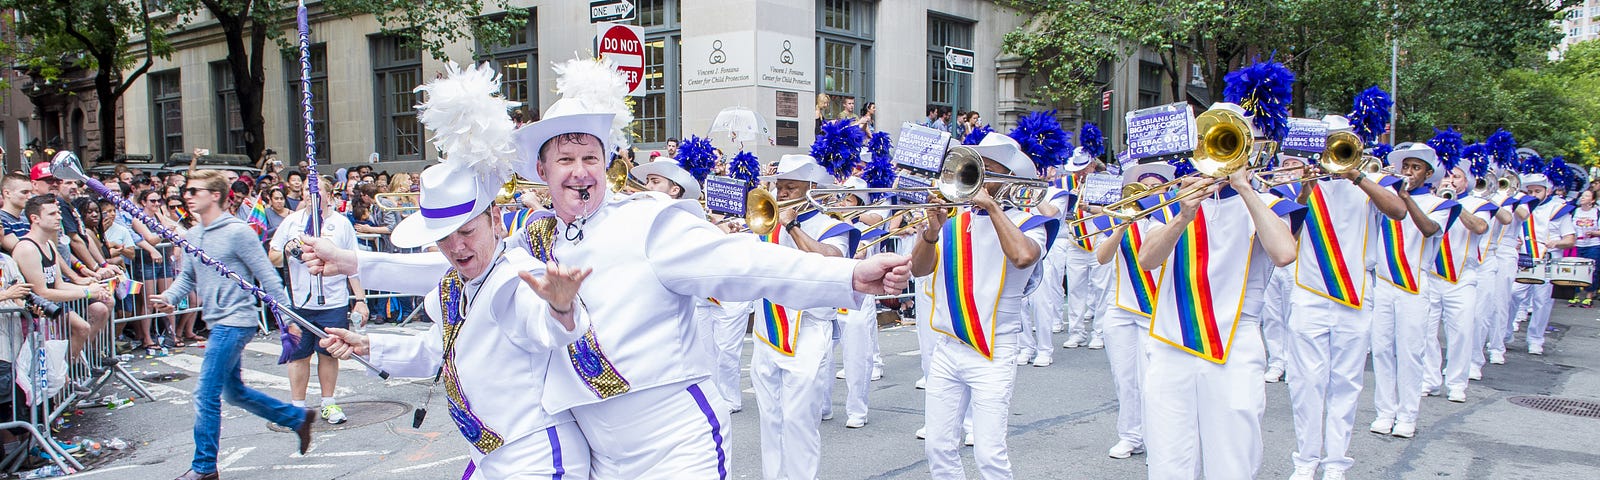 Participants march in the Gay Pride Parade on June 28, 2015 in New York City. The parade was held two days after the U.S. Supreme Court’s decision allowing gay marriage in the U.S.